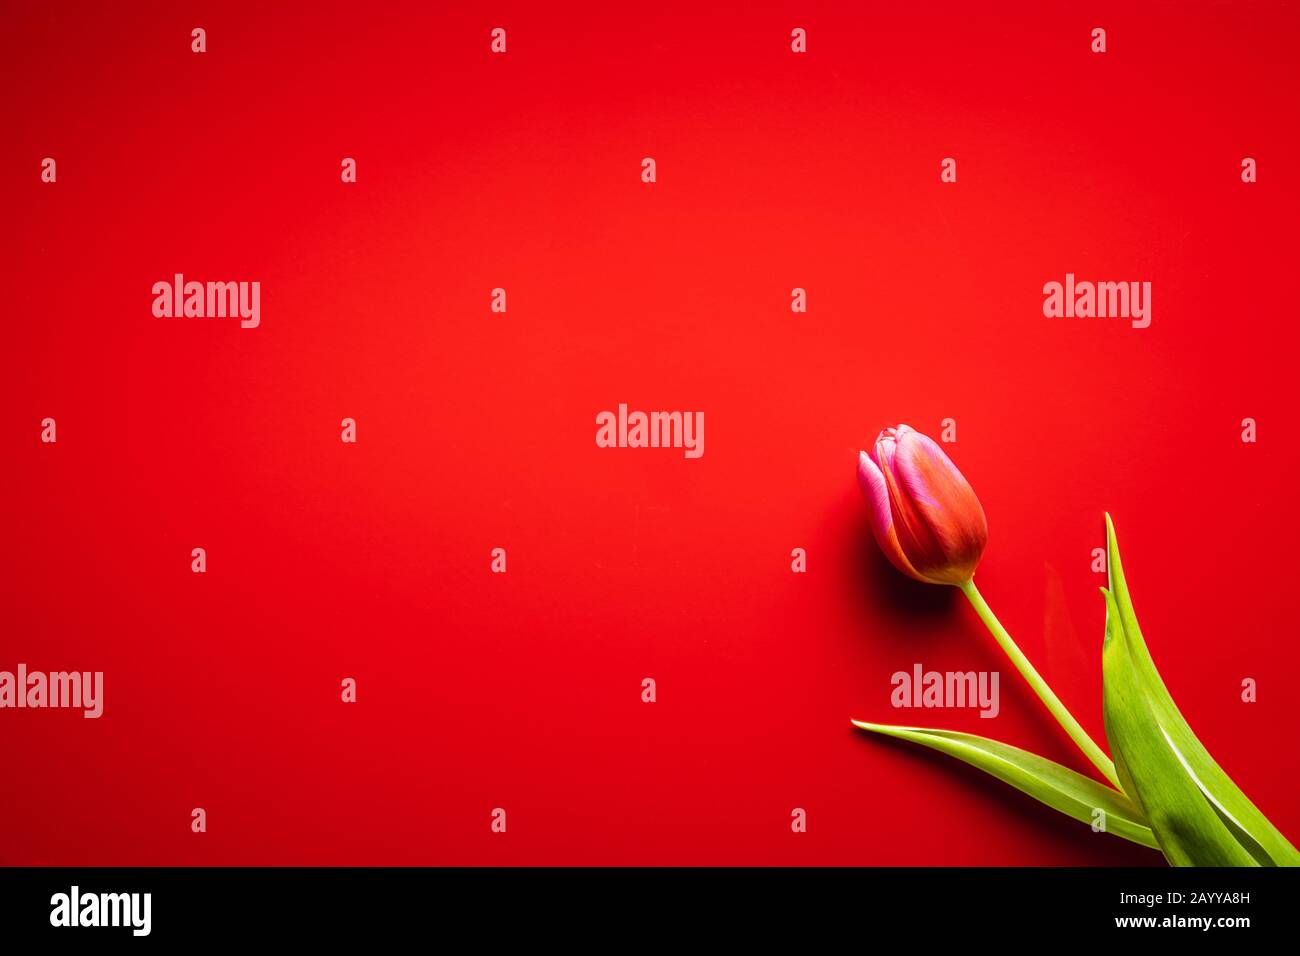 Spring flower tulip. Red tulips on red background. Stock Photo